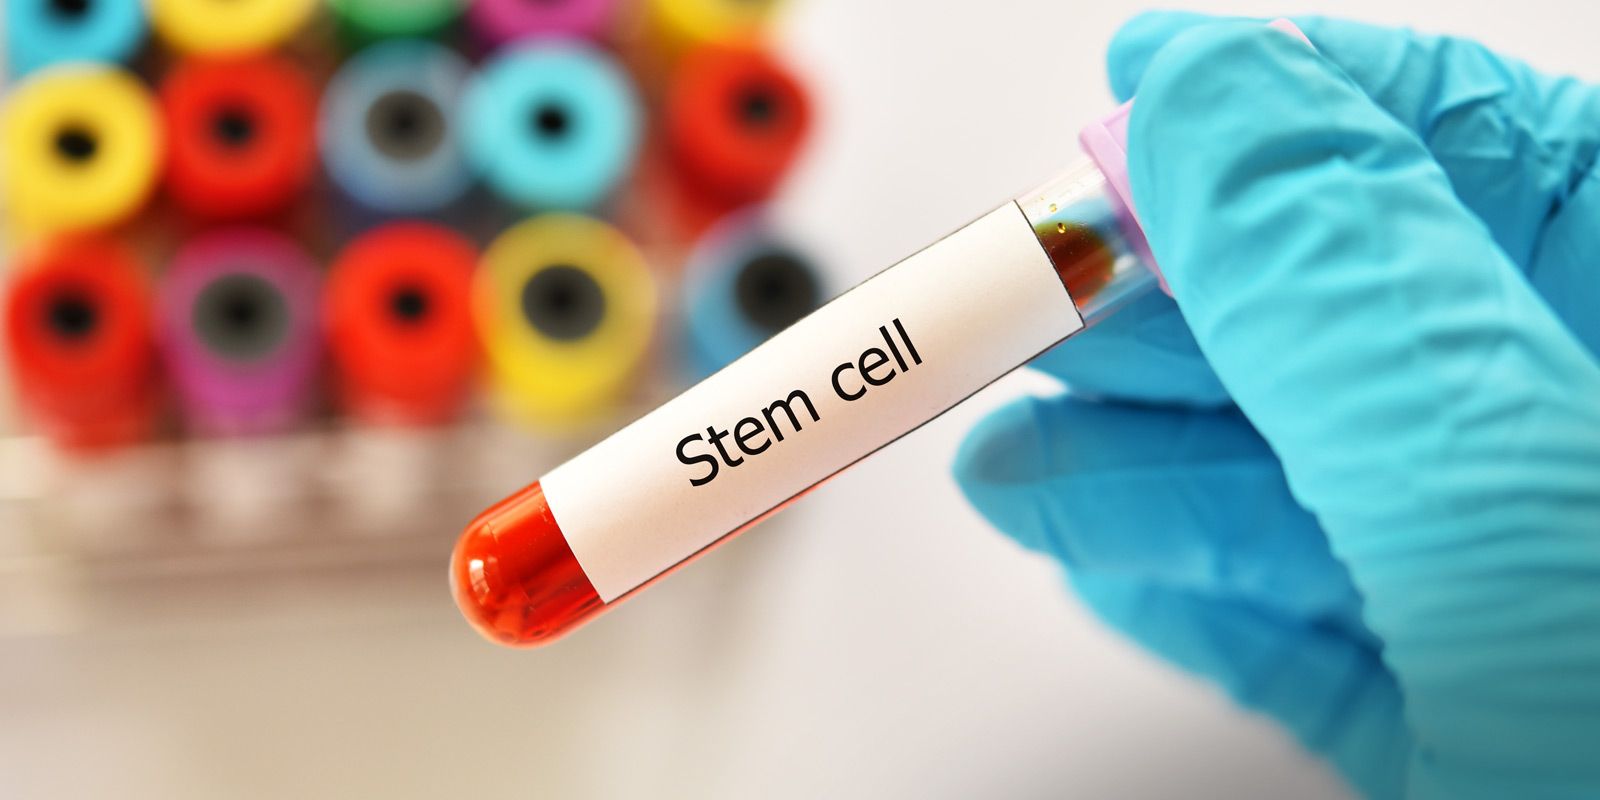 Stem Cell Therapy NYC by Dr. Alicia Armitstead. Natural Stem Cell Therapies at Healing Arts NYC Health and Wellness Center in Manhattan NY, 10017